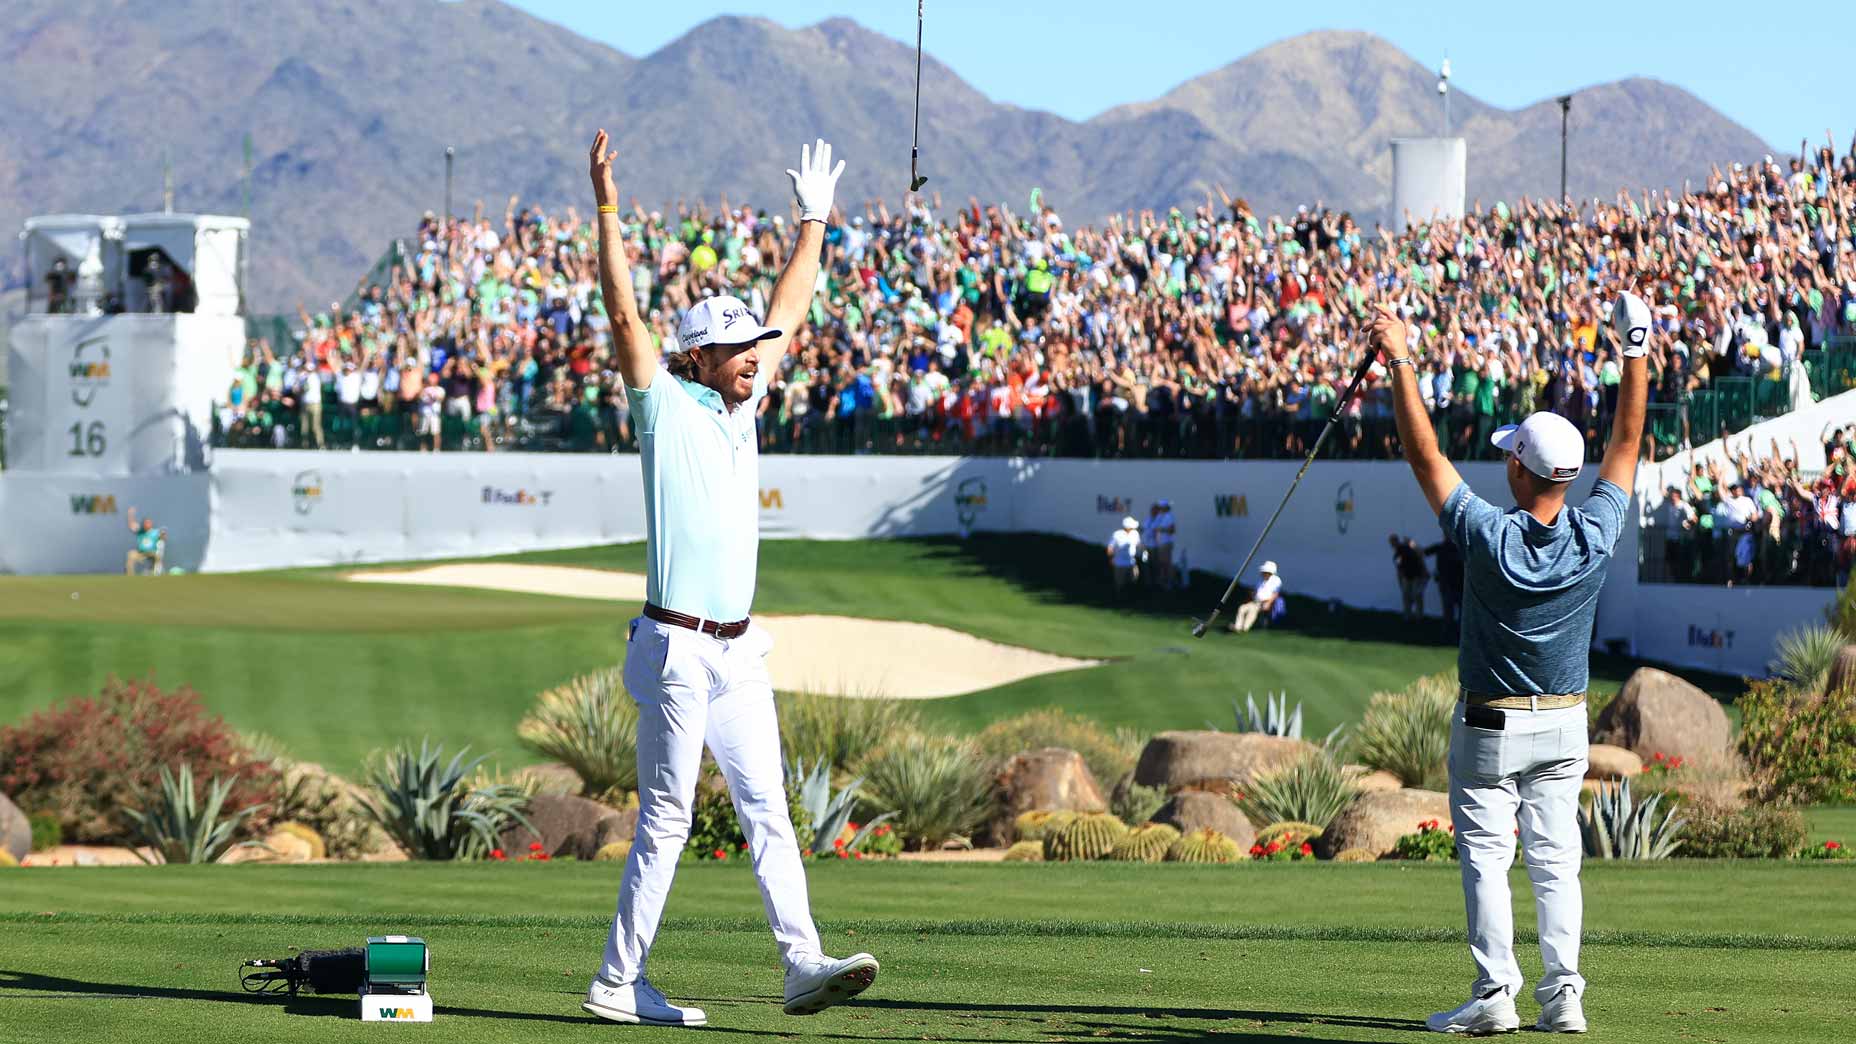 Sam Ryder of the United States reacts to his hole-in-one with Brian Harman of the United States on the 16th hole during the third round of the WM Phoenix Open at TPC Scottsdale on February 12, 2022 in Scottsdale, Arizona.